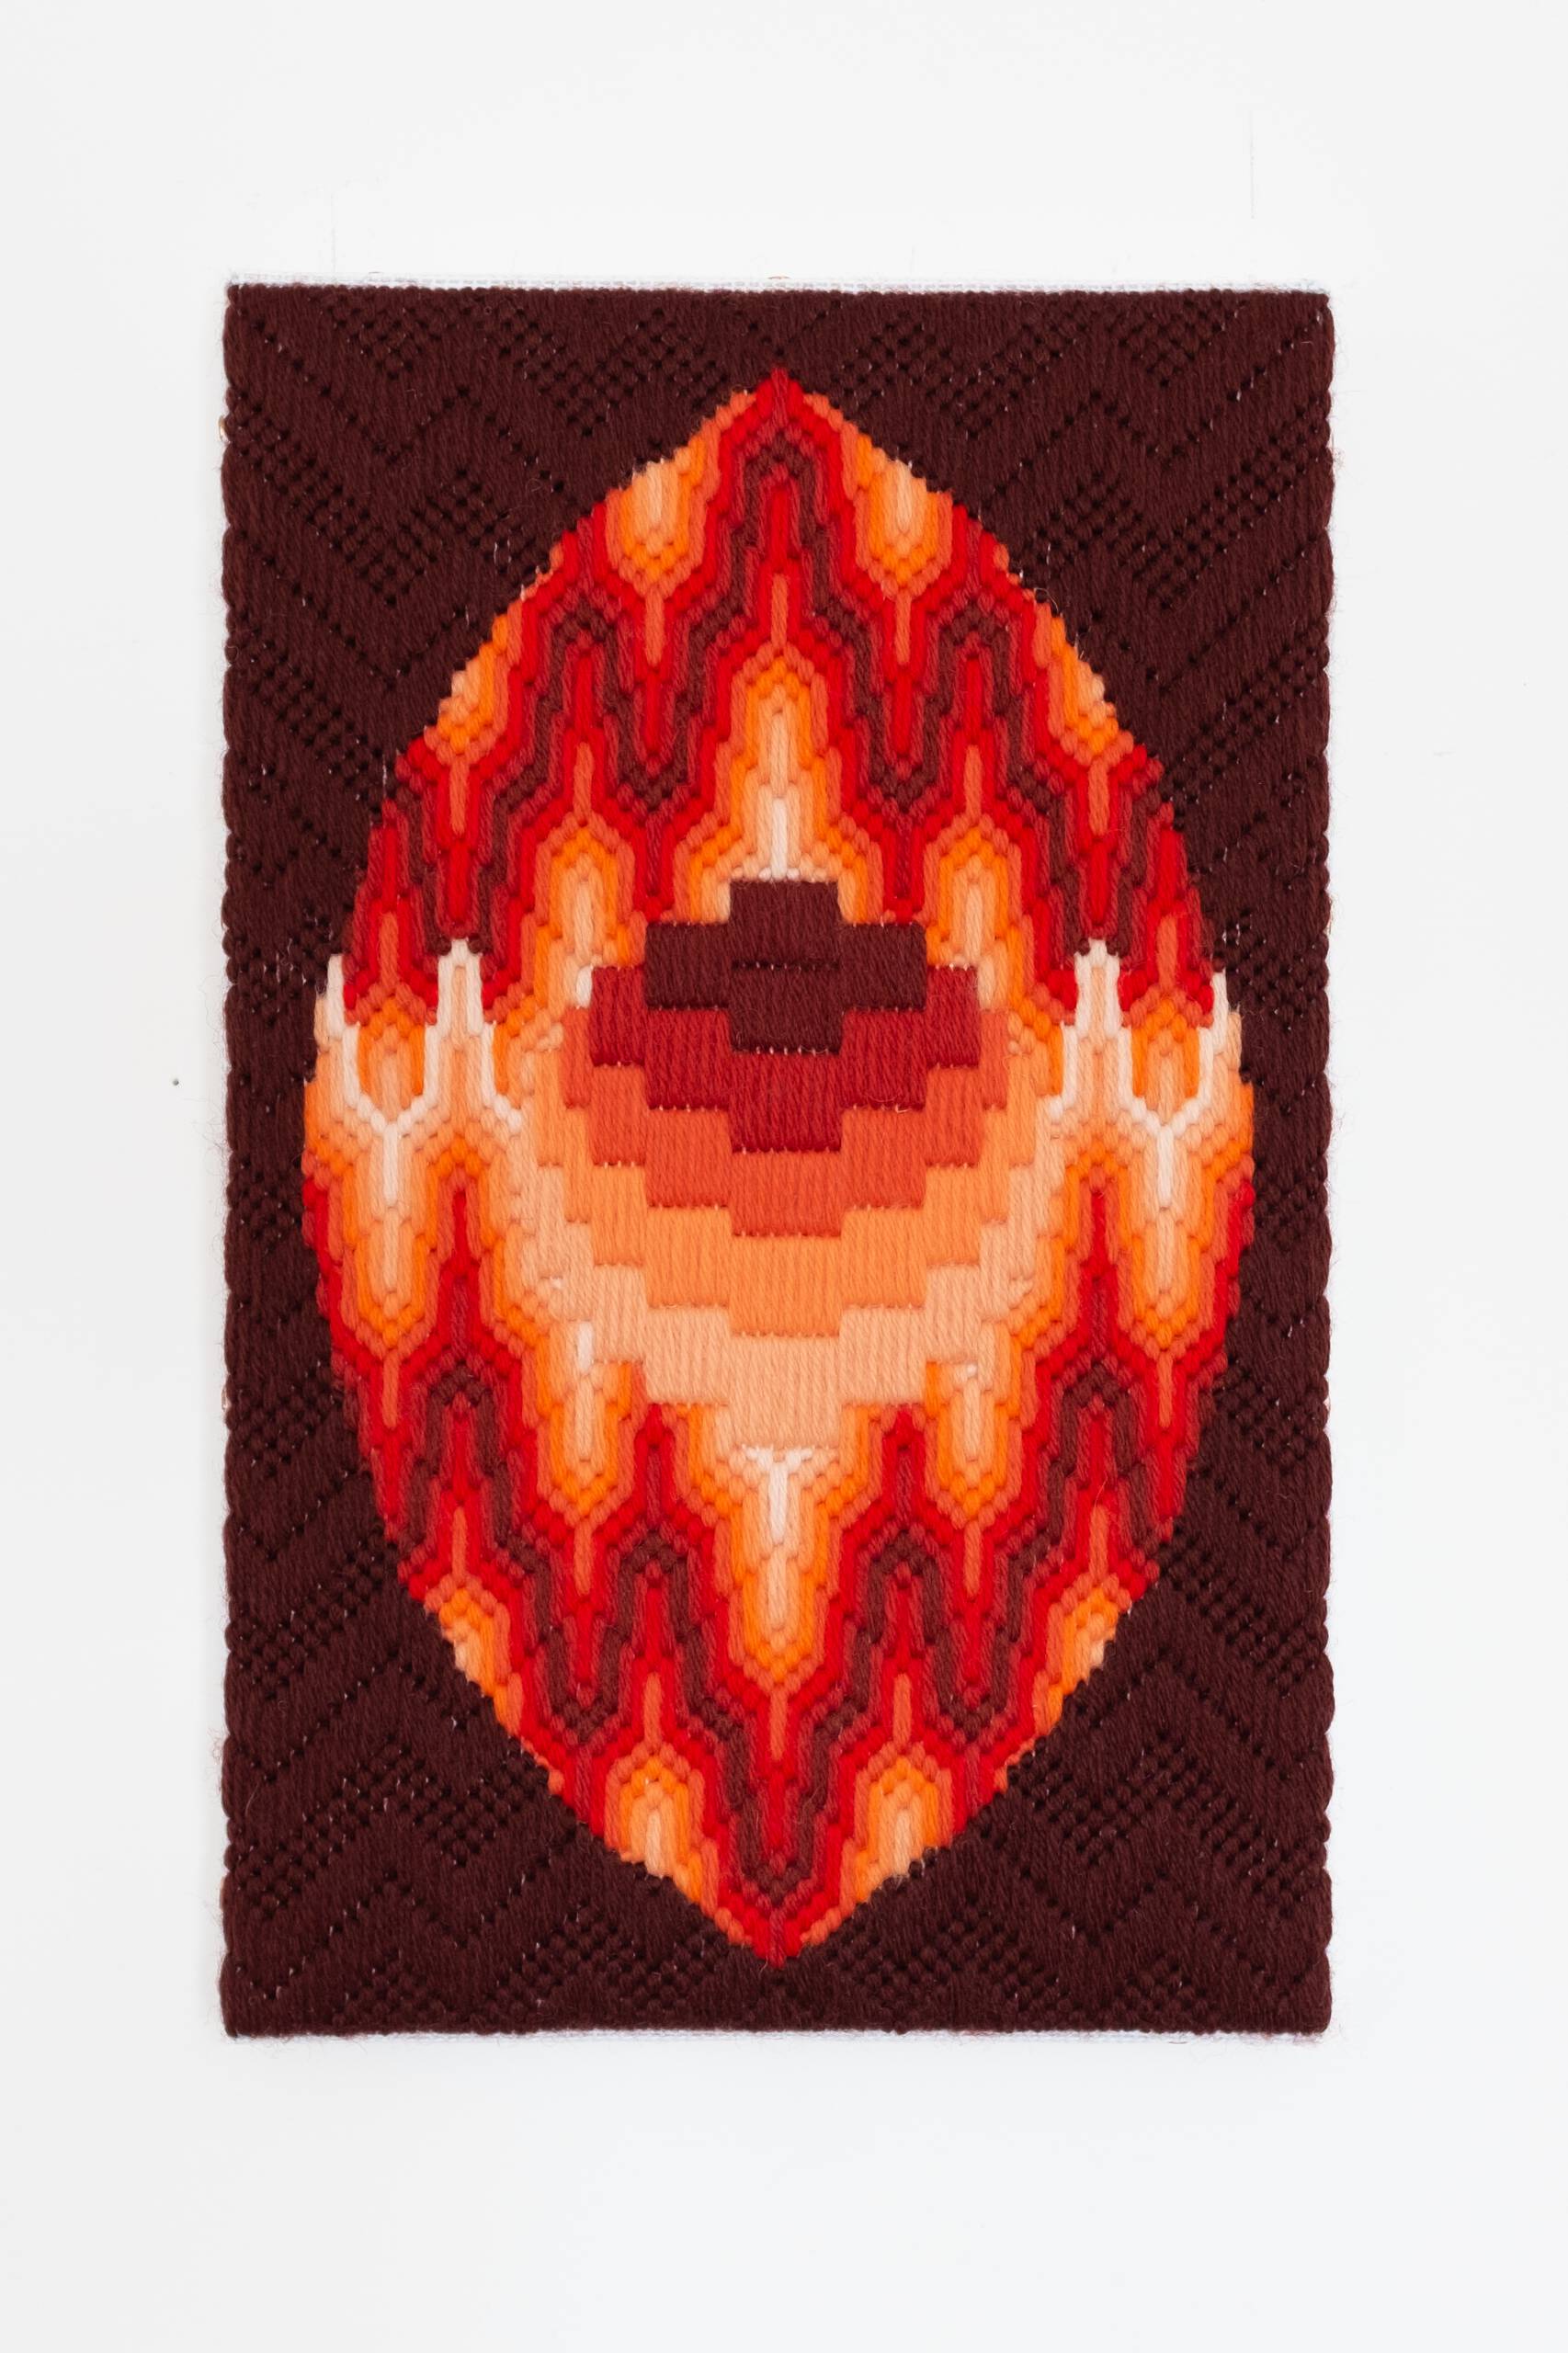 A year in retrograde [Mars], Hand-embroidered wool on canvas over panel, 2020